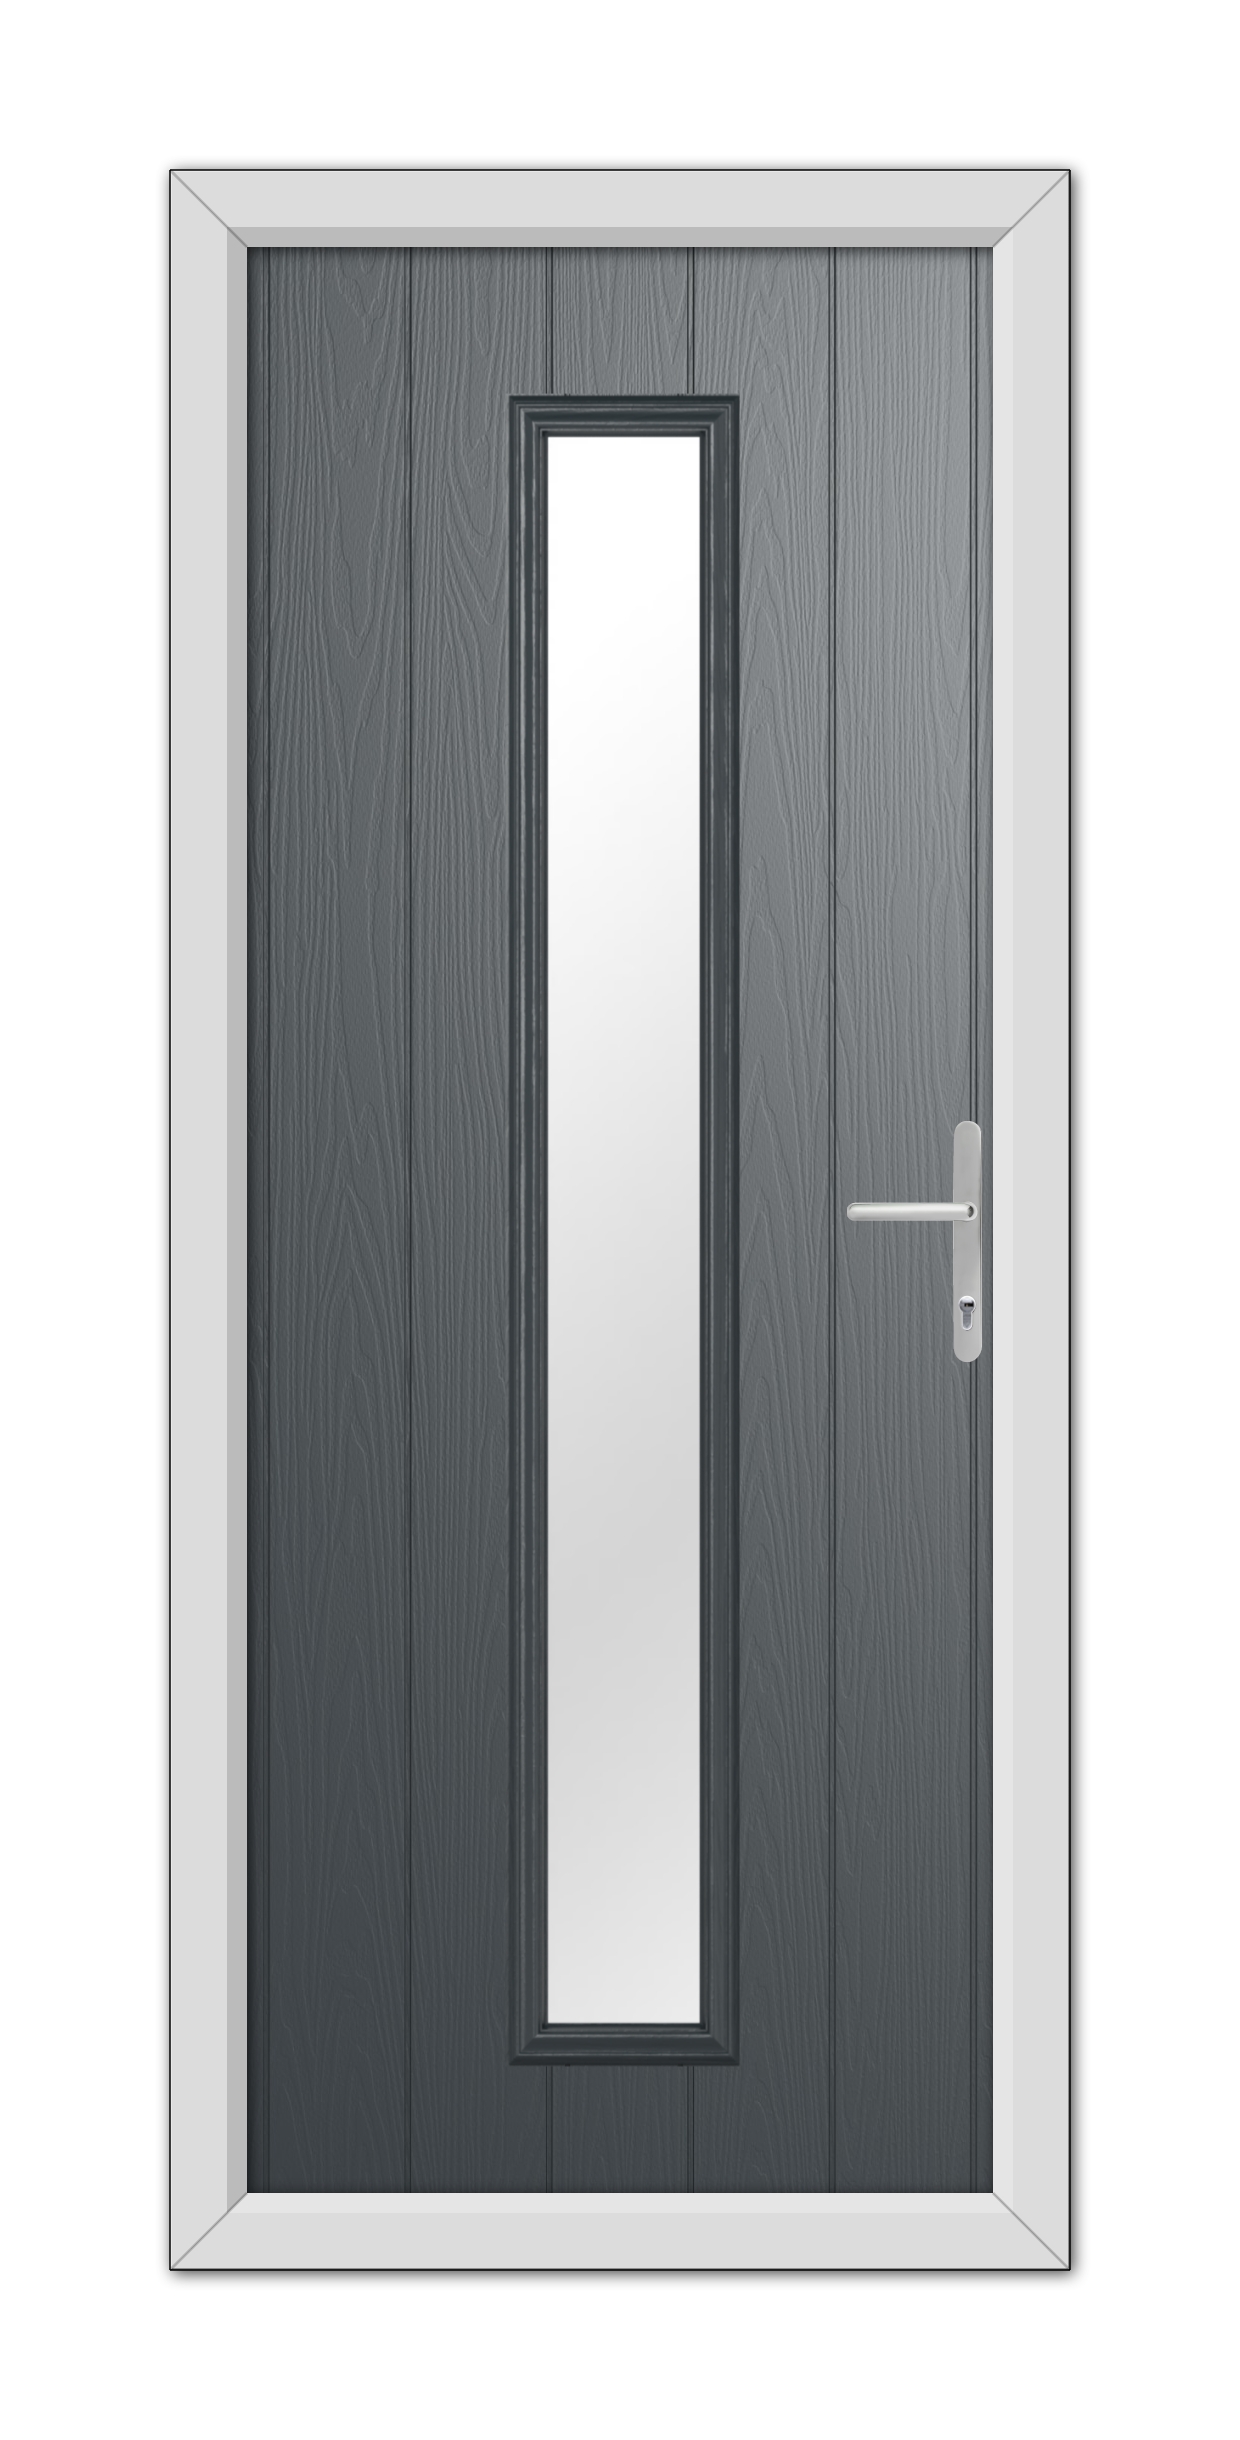 A modern Anthracite Grey Rutland Composite Door 48mm Timber Core with a vertical, rectangular glass panel and a silver handle, set within a white frame.